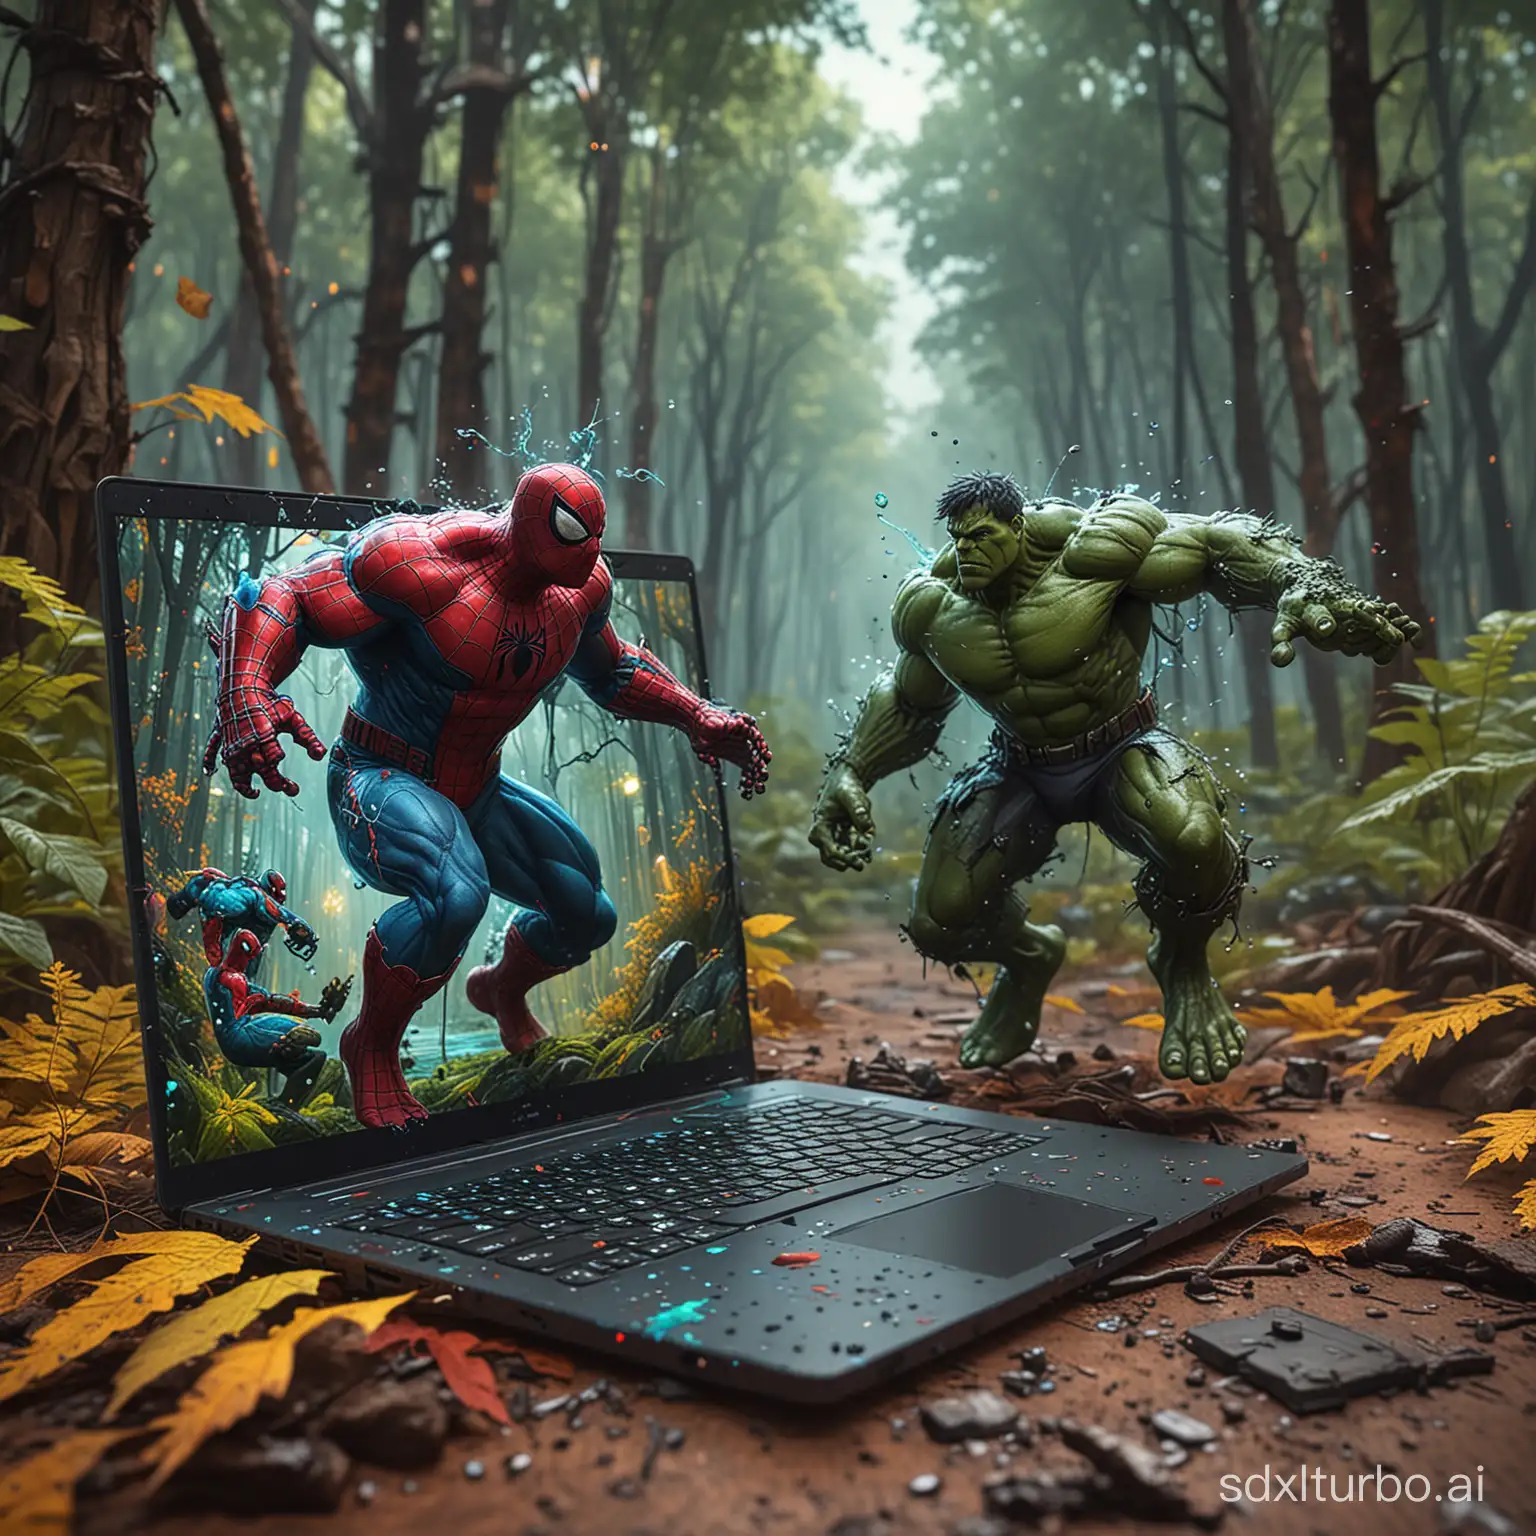 3D hologram creating steampunk Hulk and Spiderman running out of laptop in a colorful forest actions Smartphone ultra-realistic 4K splatter splash ink edges detailed matte painting, deep color, fantastical, intricate detail, splash screen, complementary colors, fantasy concept art